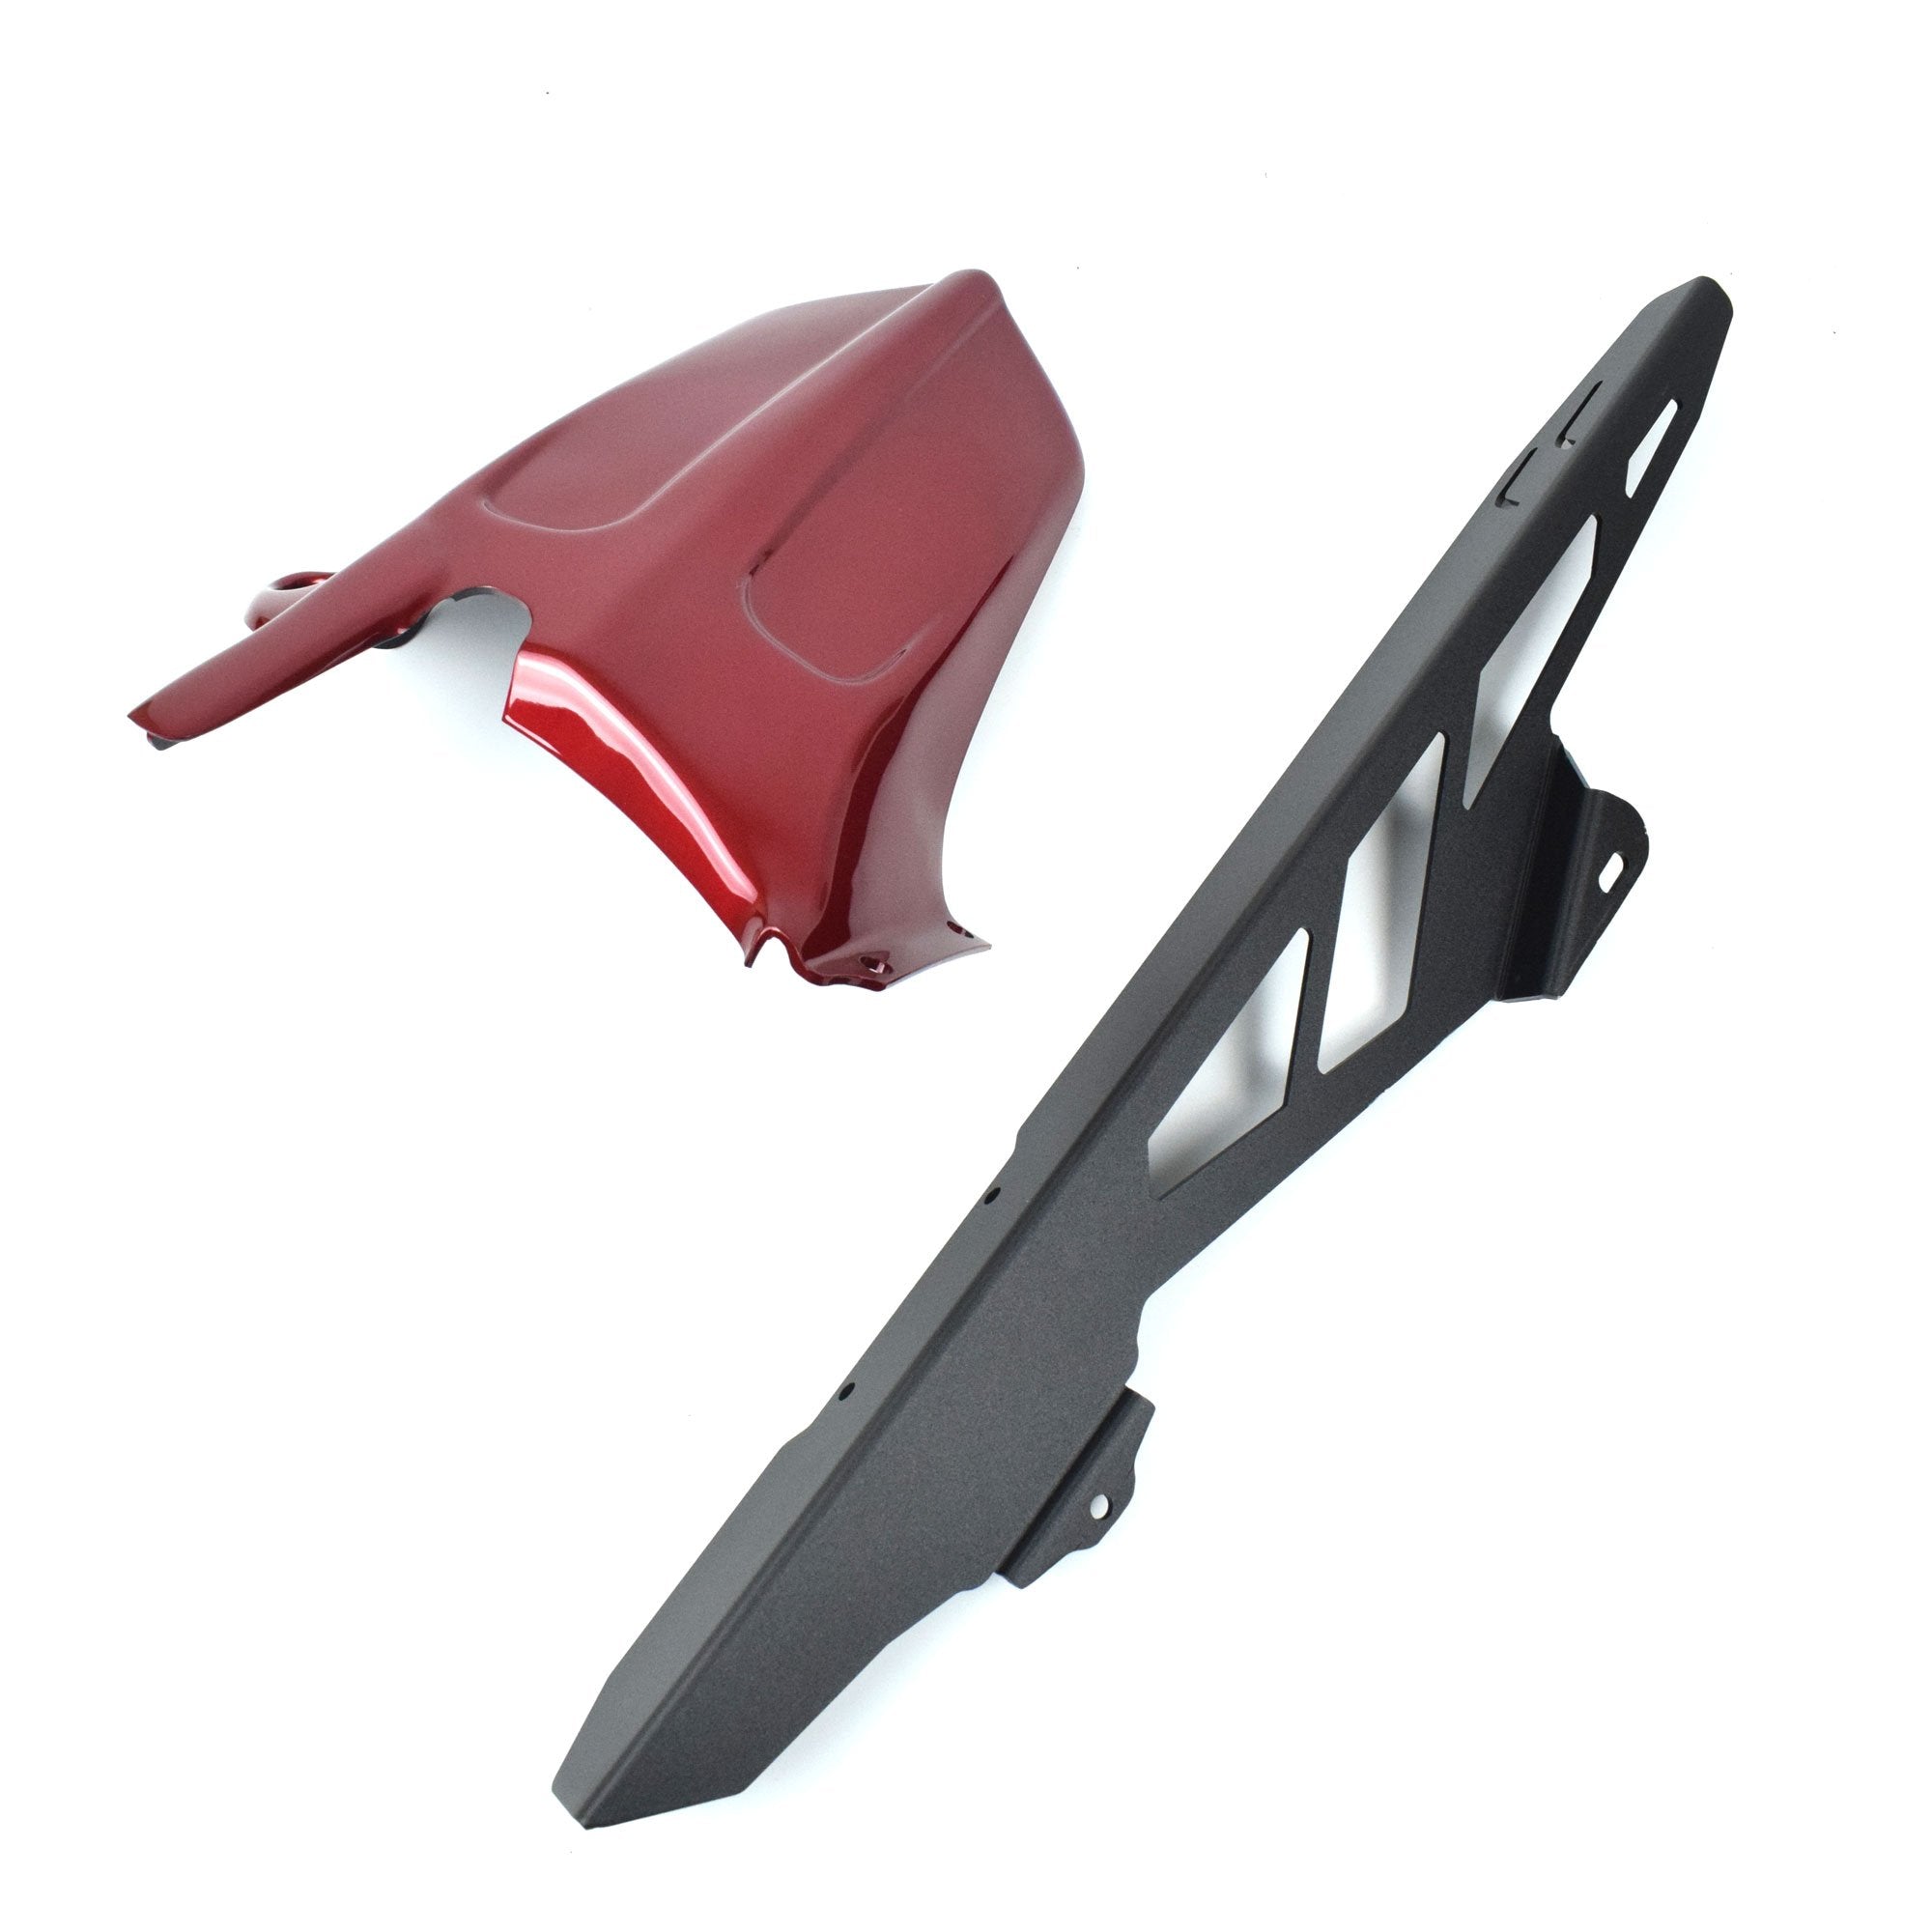 Ermax Hugger | Candy Chromosphere Red | Honda CB 650 R 2019>2020-E7301T04-H6-Huggers-Pyramid Motorcycle Accessories